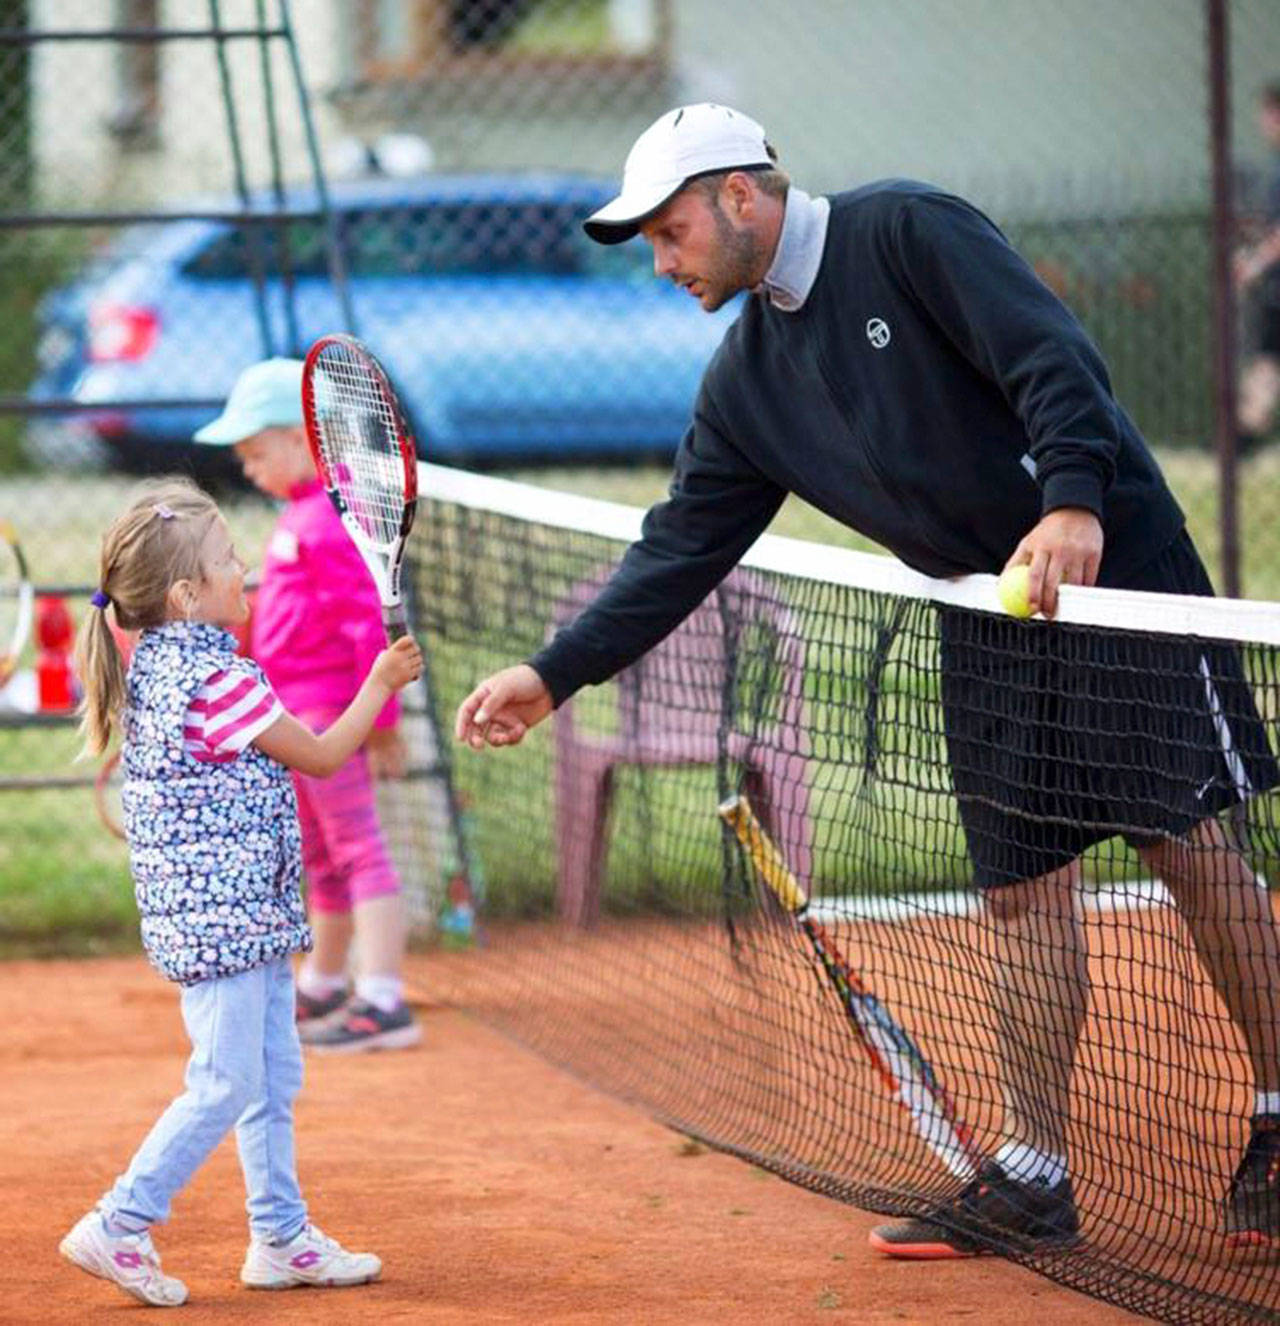 Vashon Tennis Club instructor and Czech tennis coach, Jaroslav (Jerry) Honc, with a young player from the club’s 2017 summer camps (Courtesy photo).